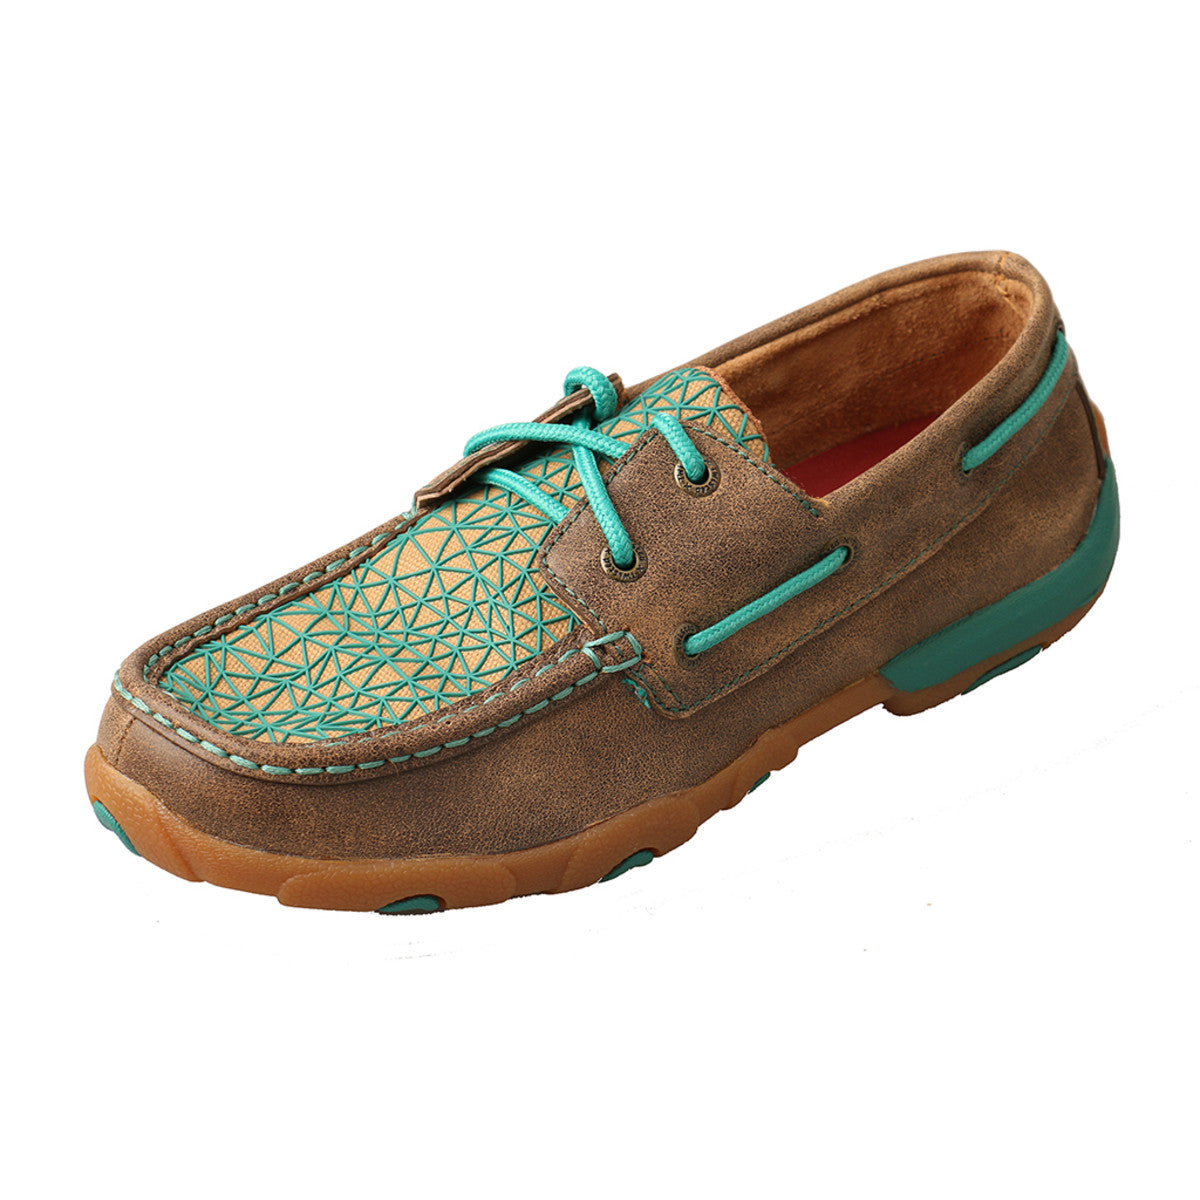 Women's Twisted X Boat Shoe Driving Moccasins in Bomber/Turquoise from the side view